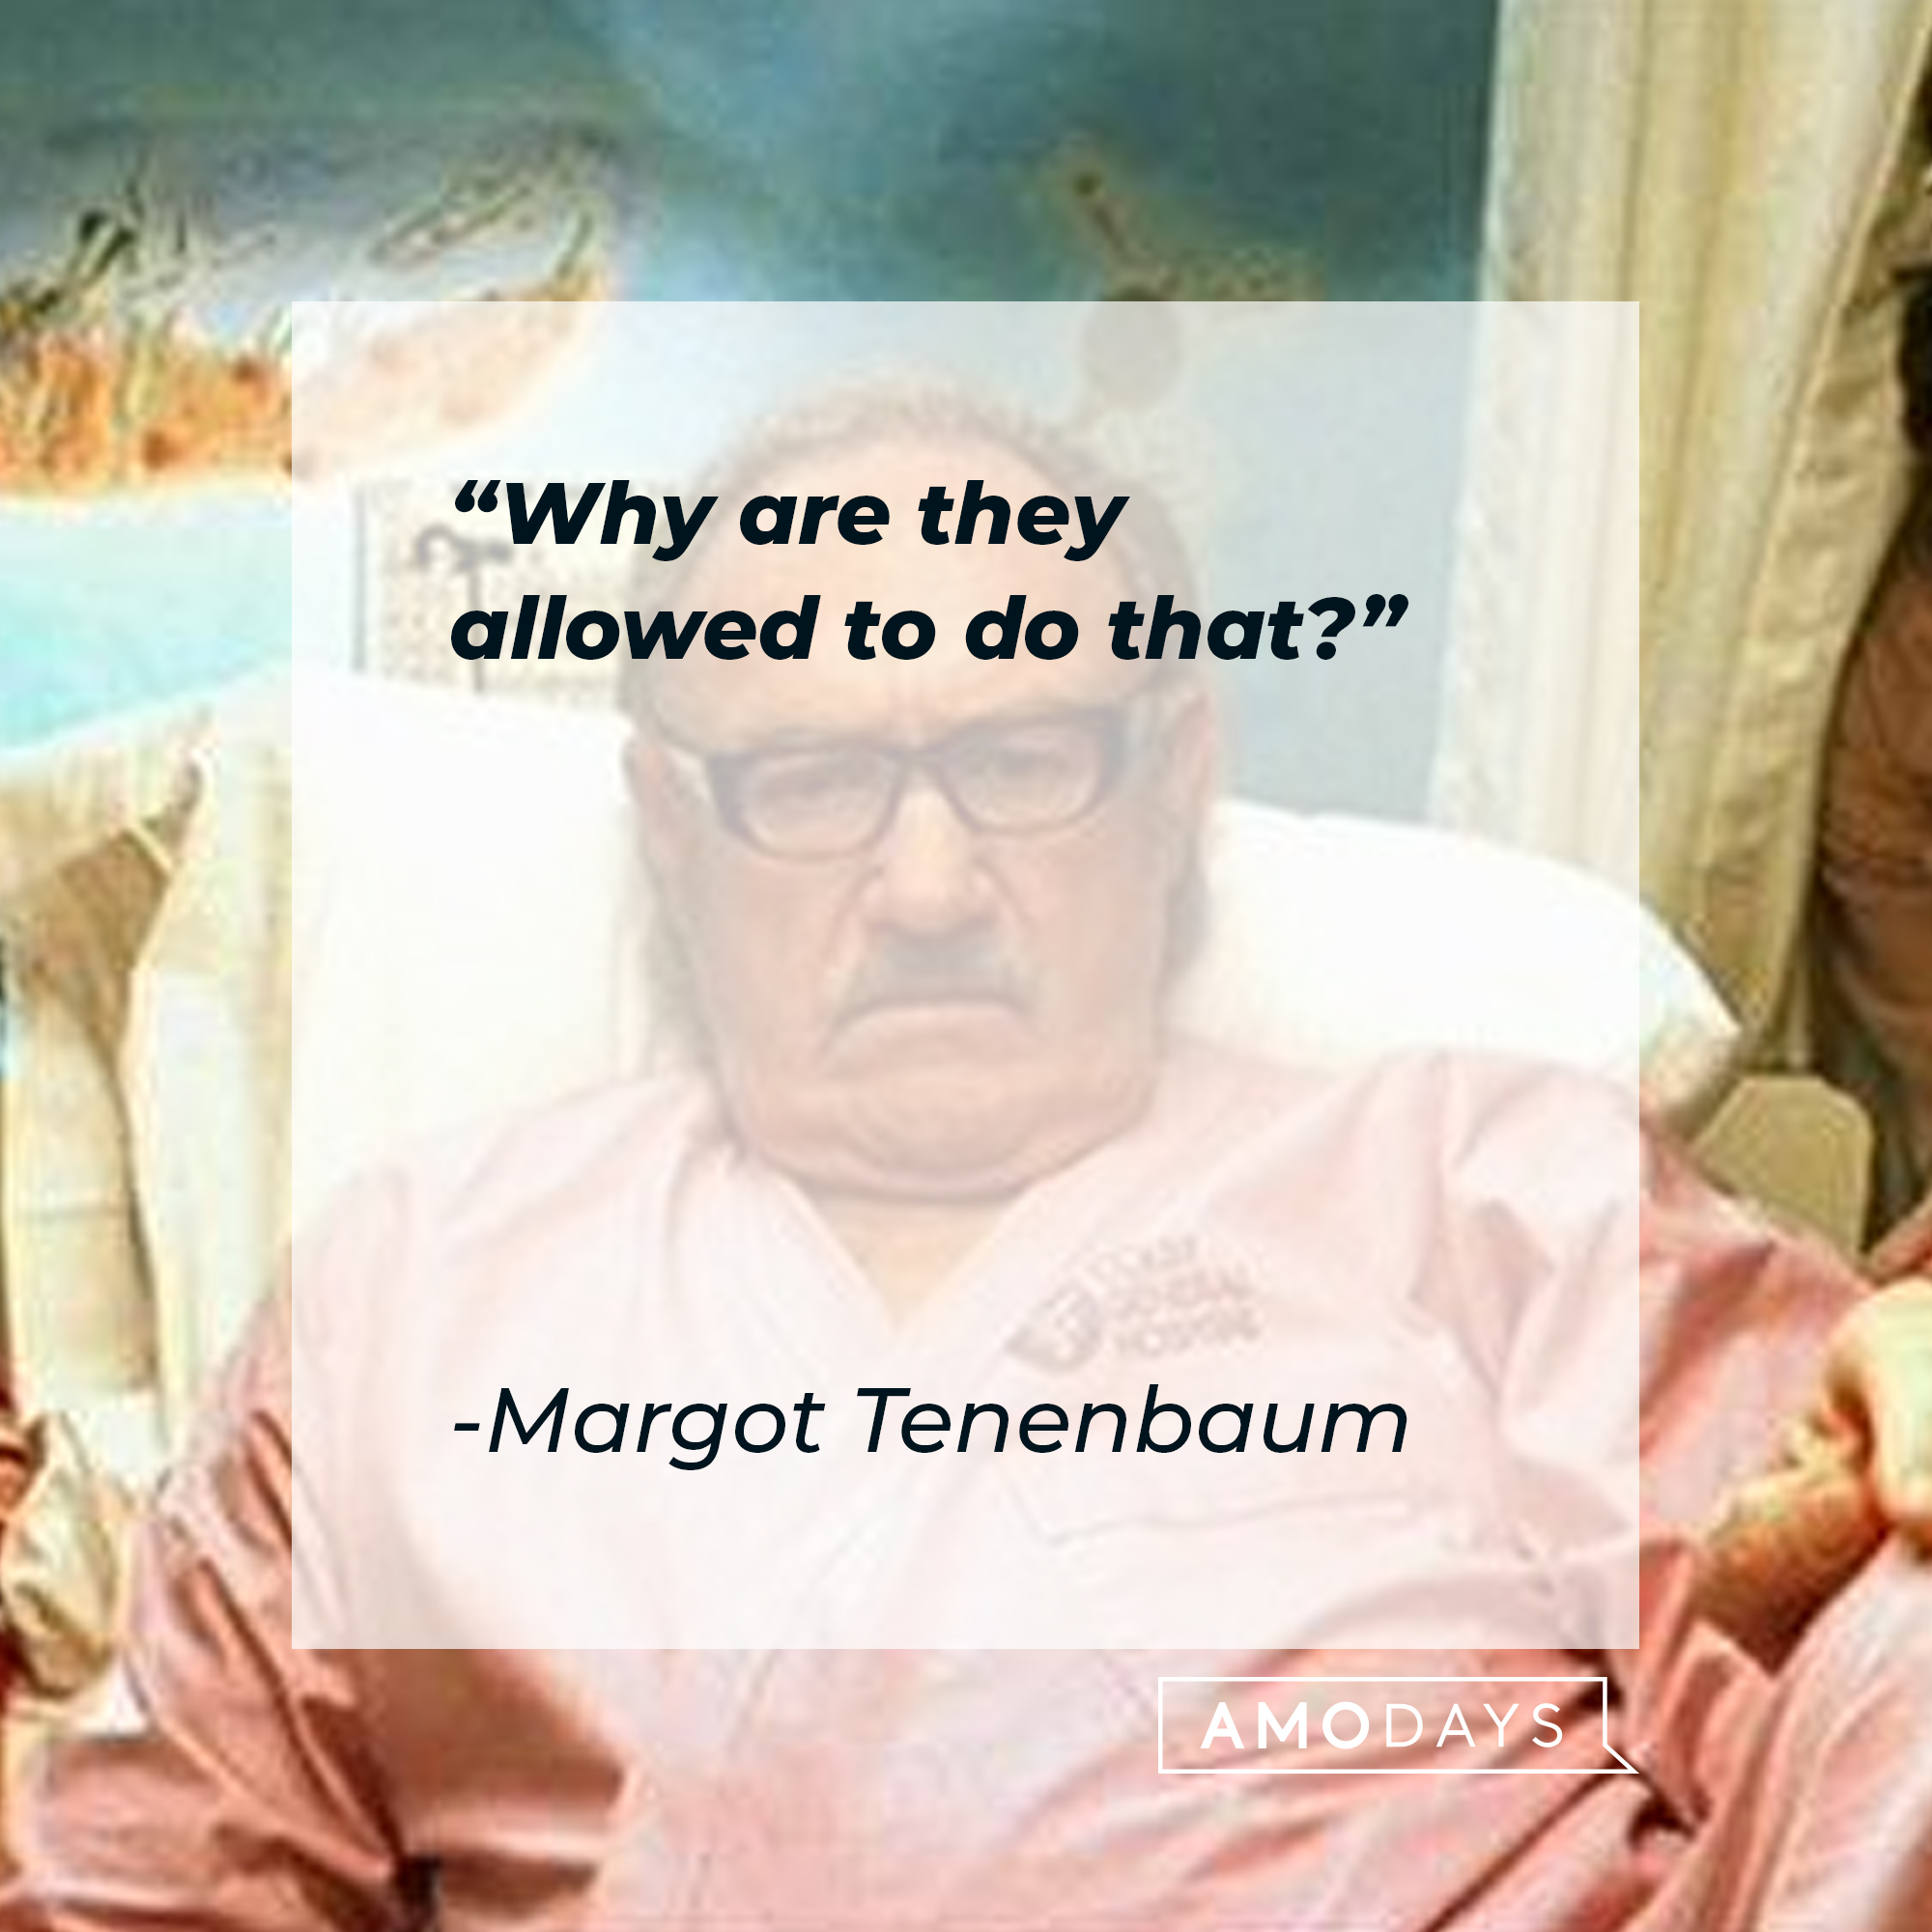 Margot Tenenbaum's quote: "Why are they allowed to do that?" | Image: AmoDays